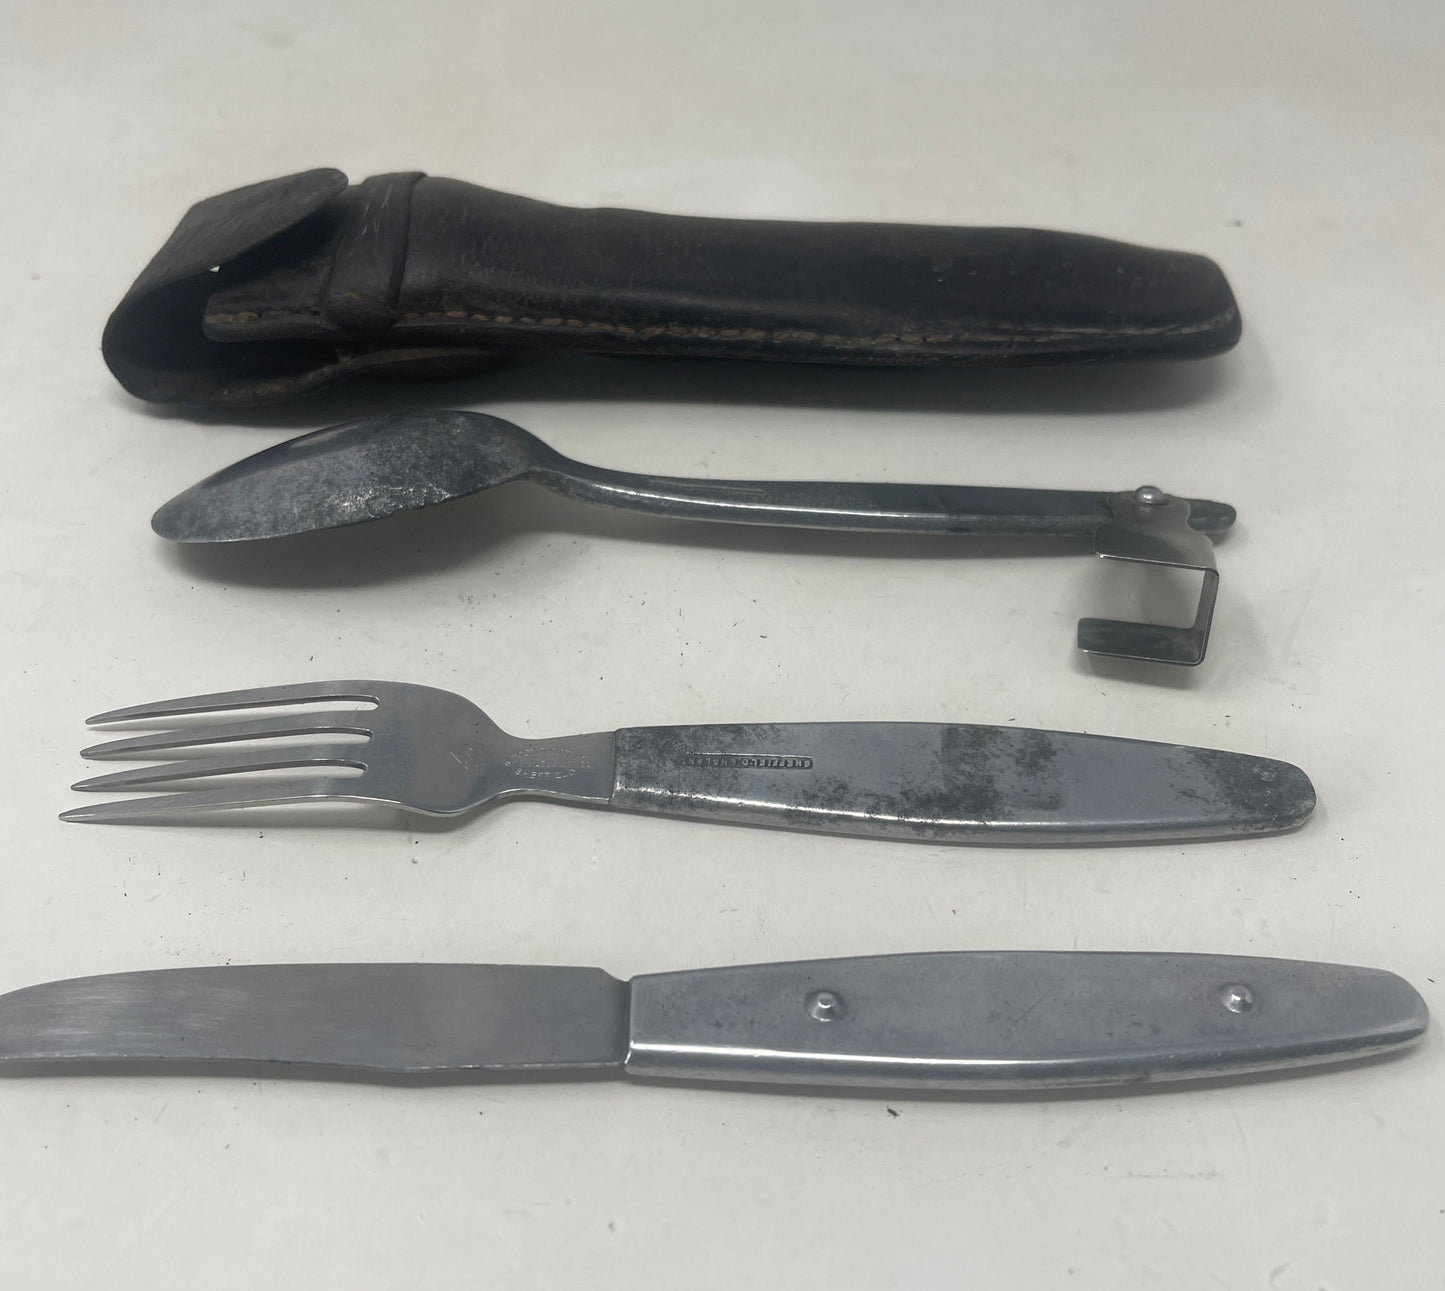 Knife, fork, and spoon set dated 1944